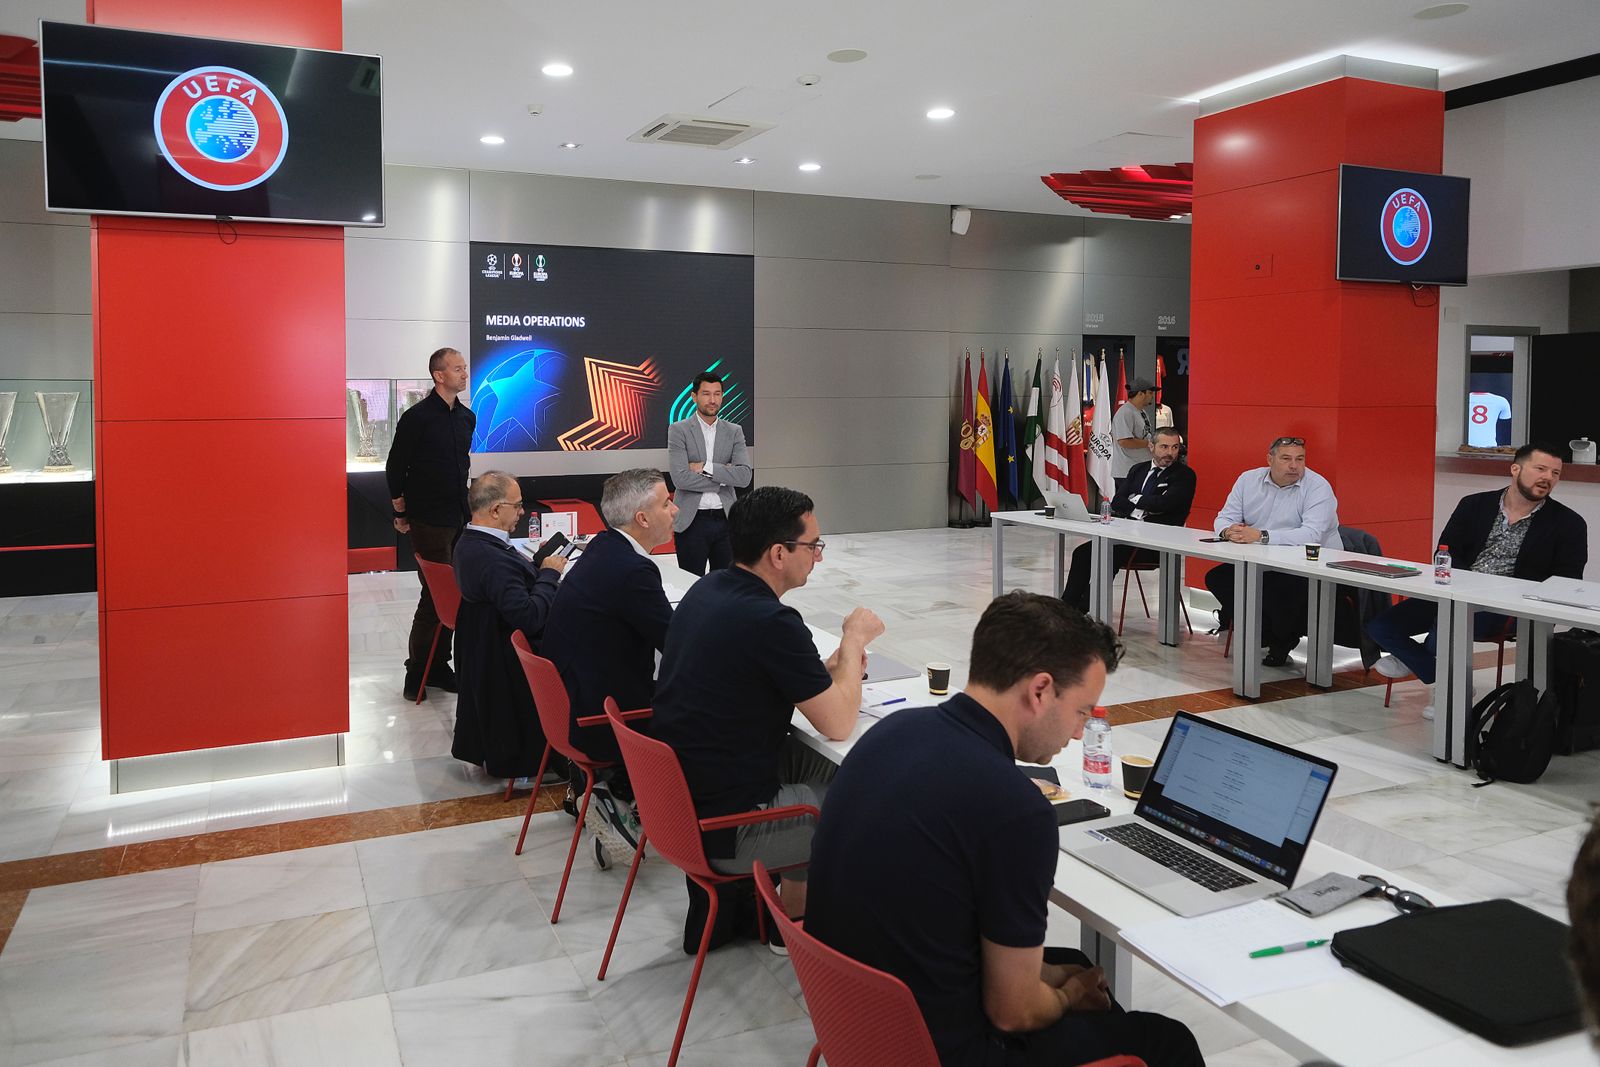 UEFA meeting held at the Sánchez-Pizjuán the CMF